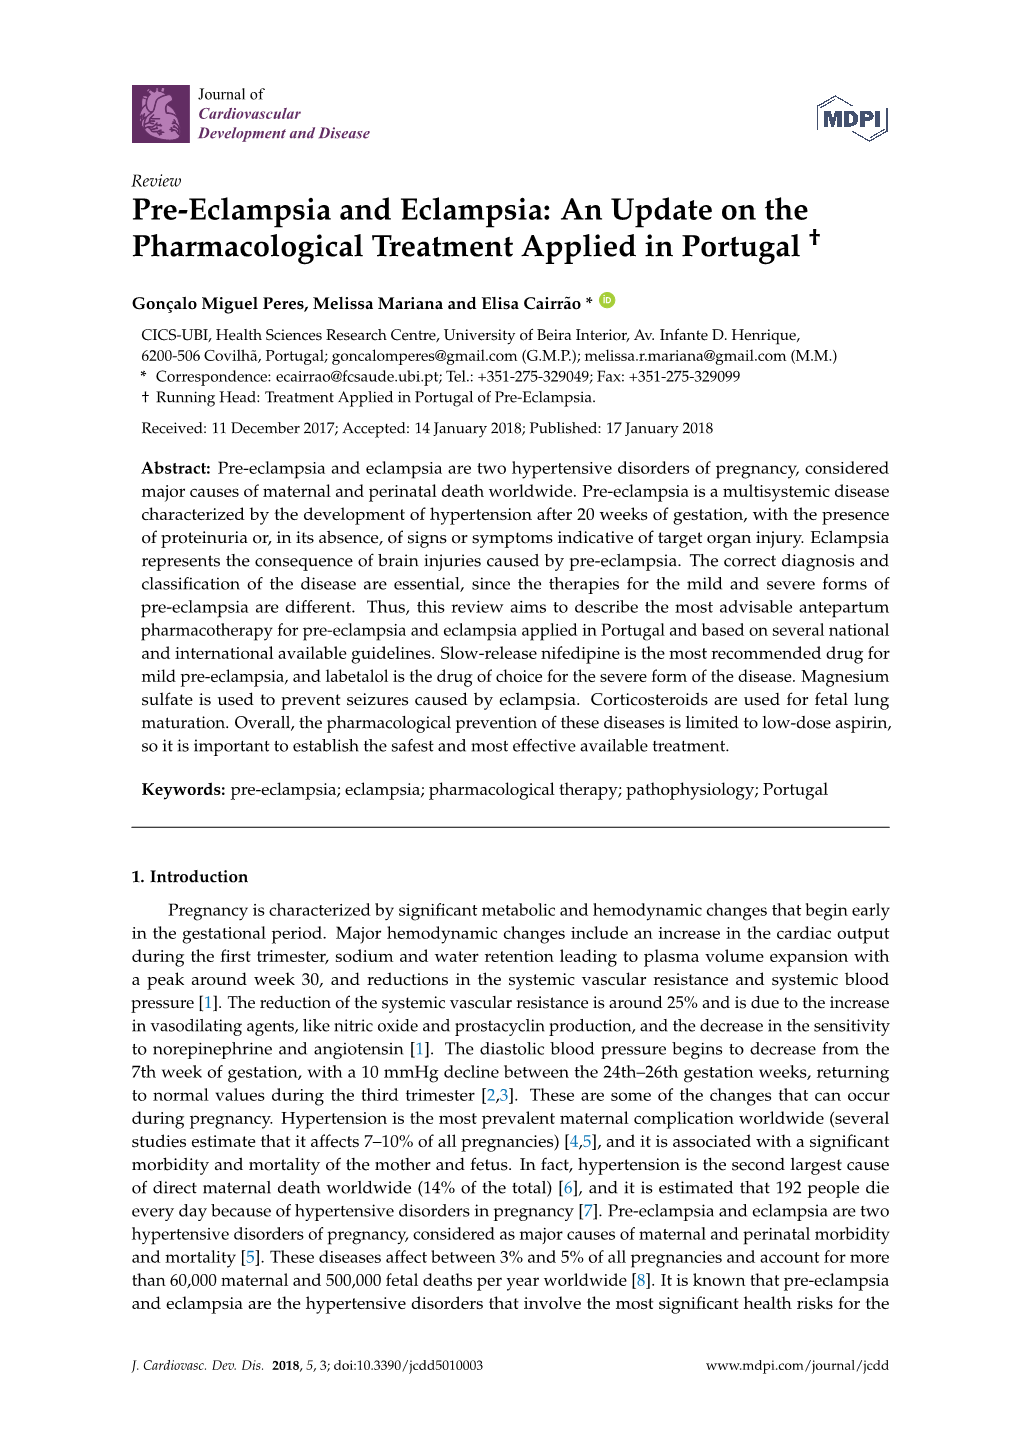 Pre-Eclampsia and Eclampsia: an Update on the Pharmacological Treatment Applied in Portugal †